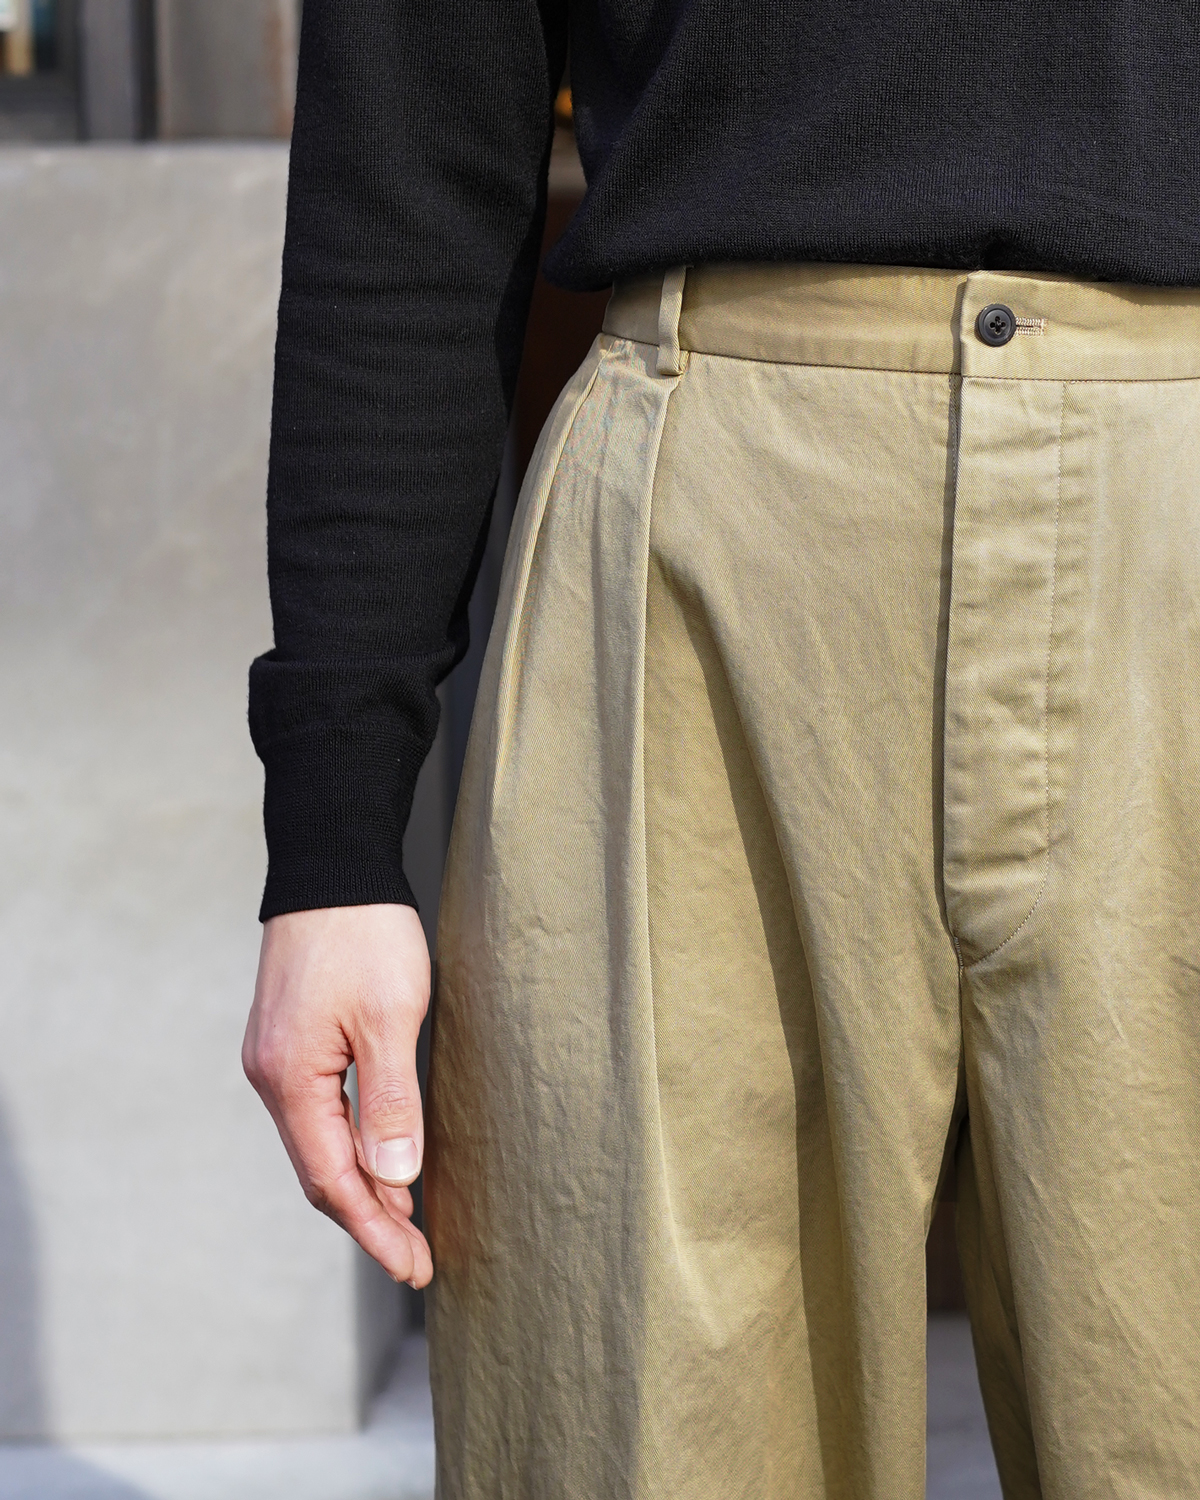 NEAT｜NEAT Chino - Beige｜PRODUCT｜Continuer Inc.｜メガネ 